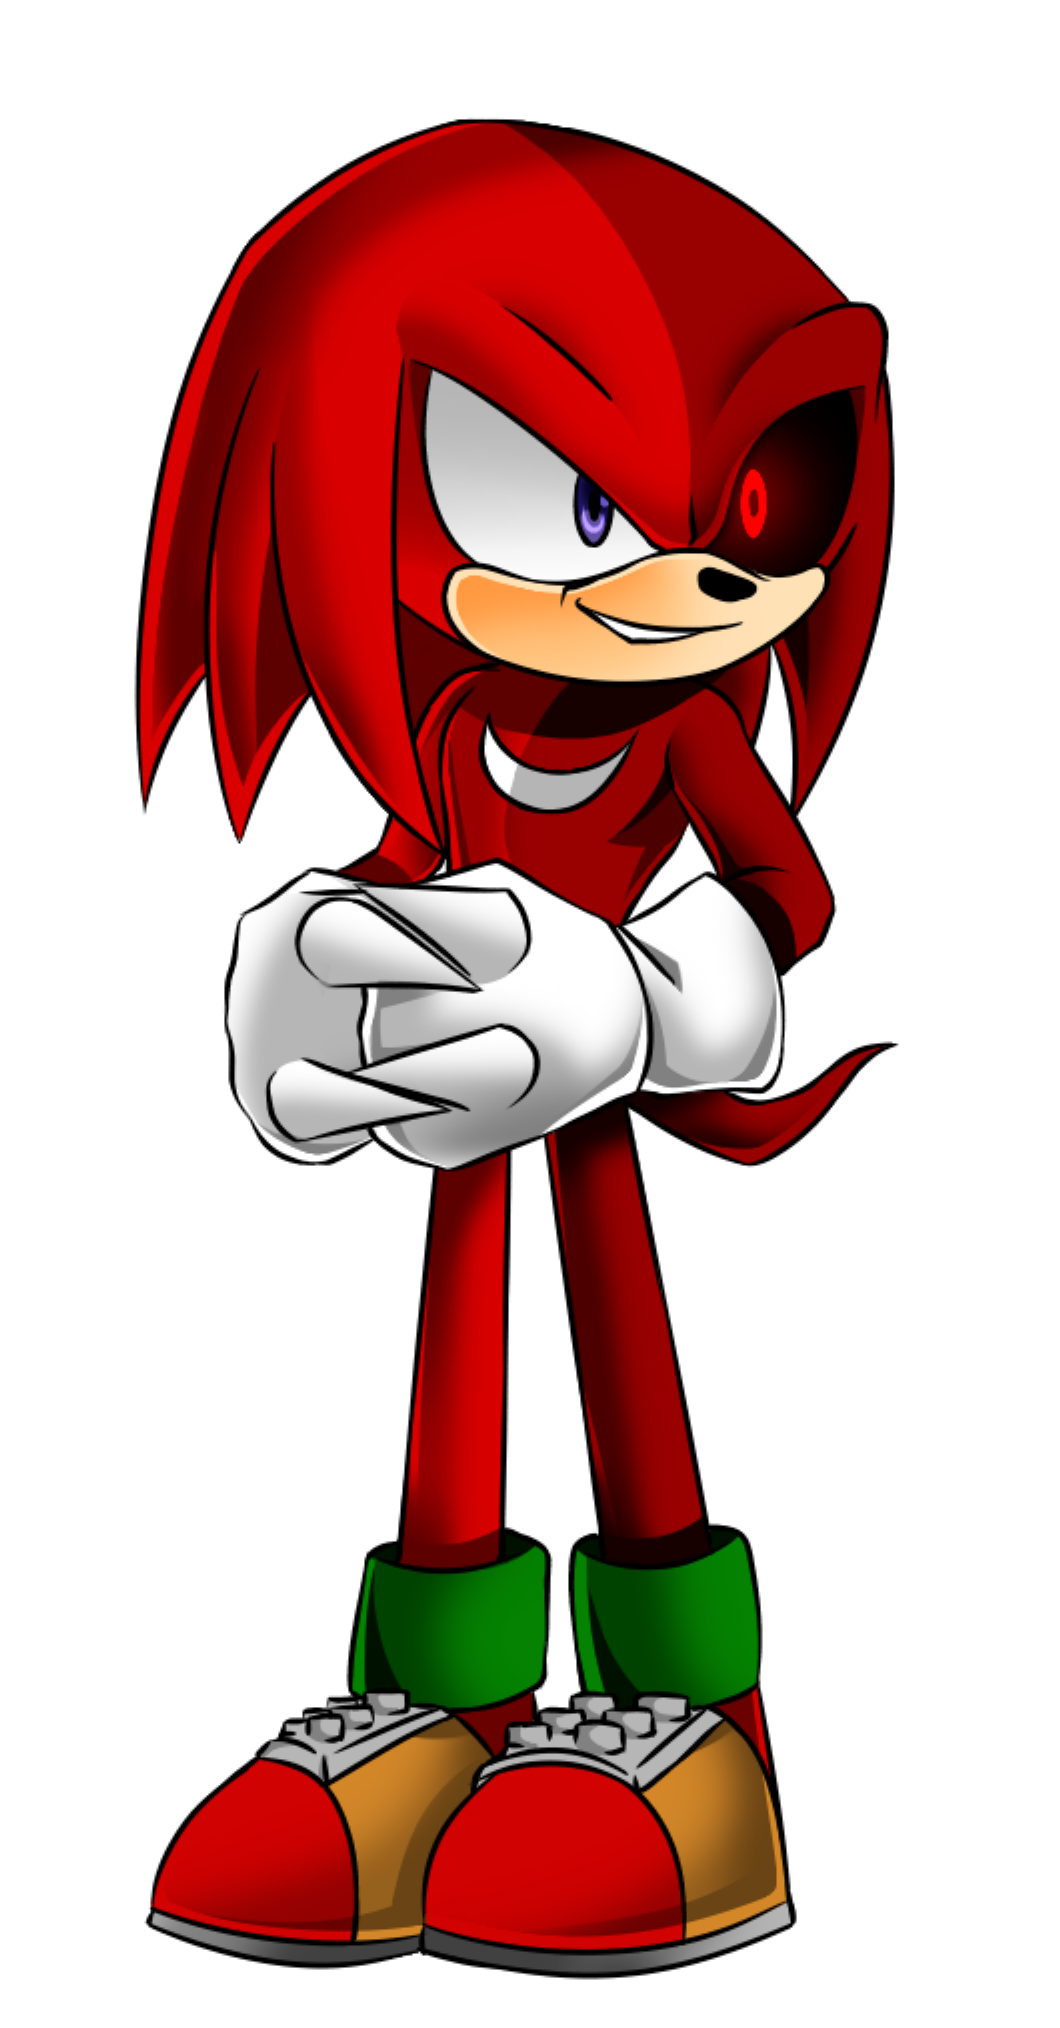 sonic knuckles felt cute might delete later